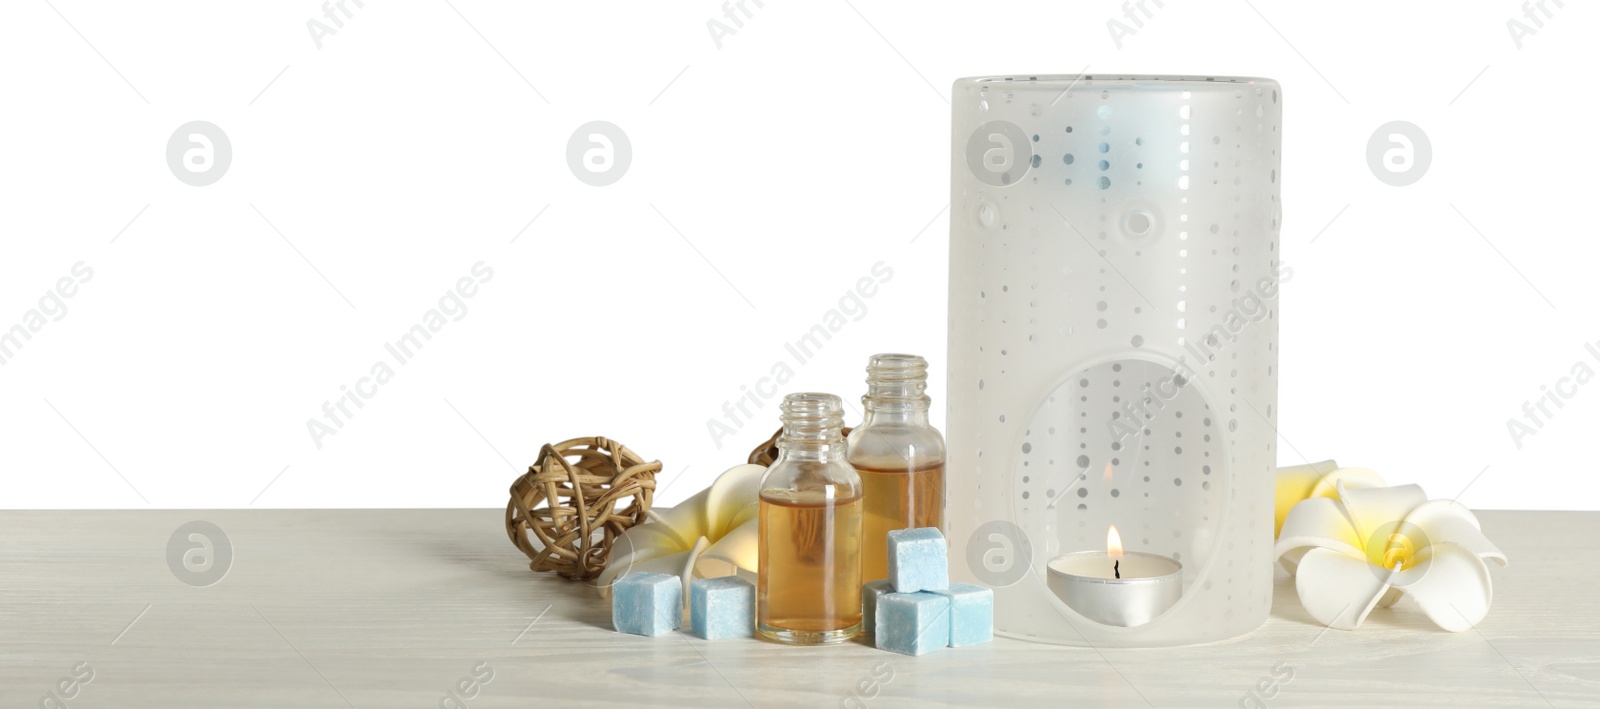 Photo of Composition with aroma lamp on white table against light grey background, space for text